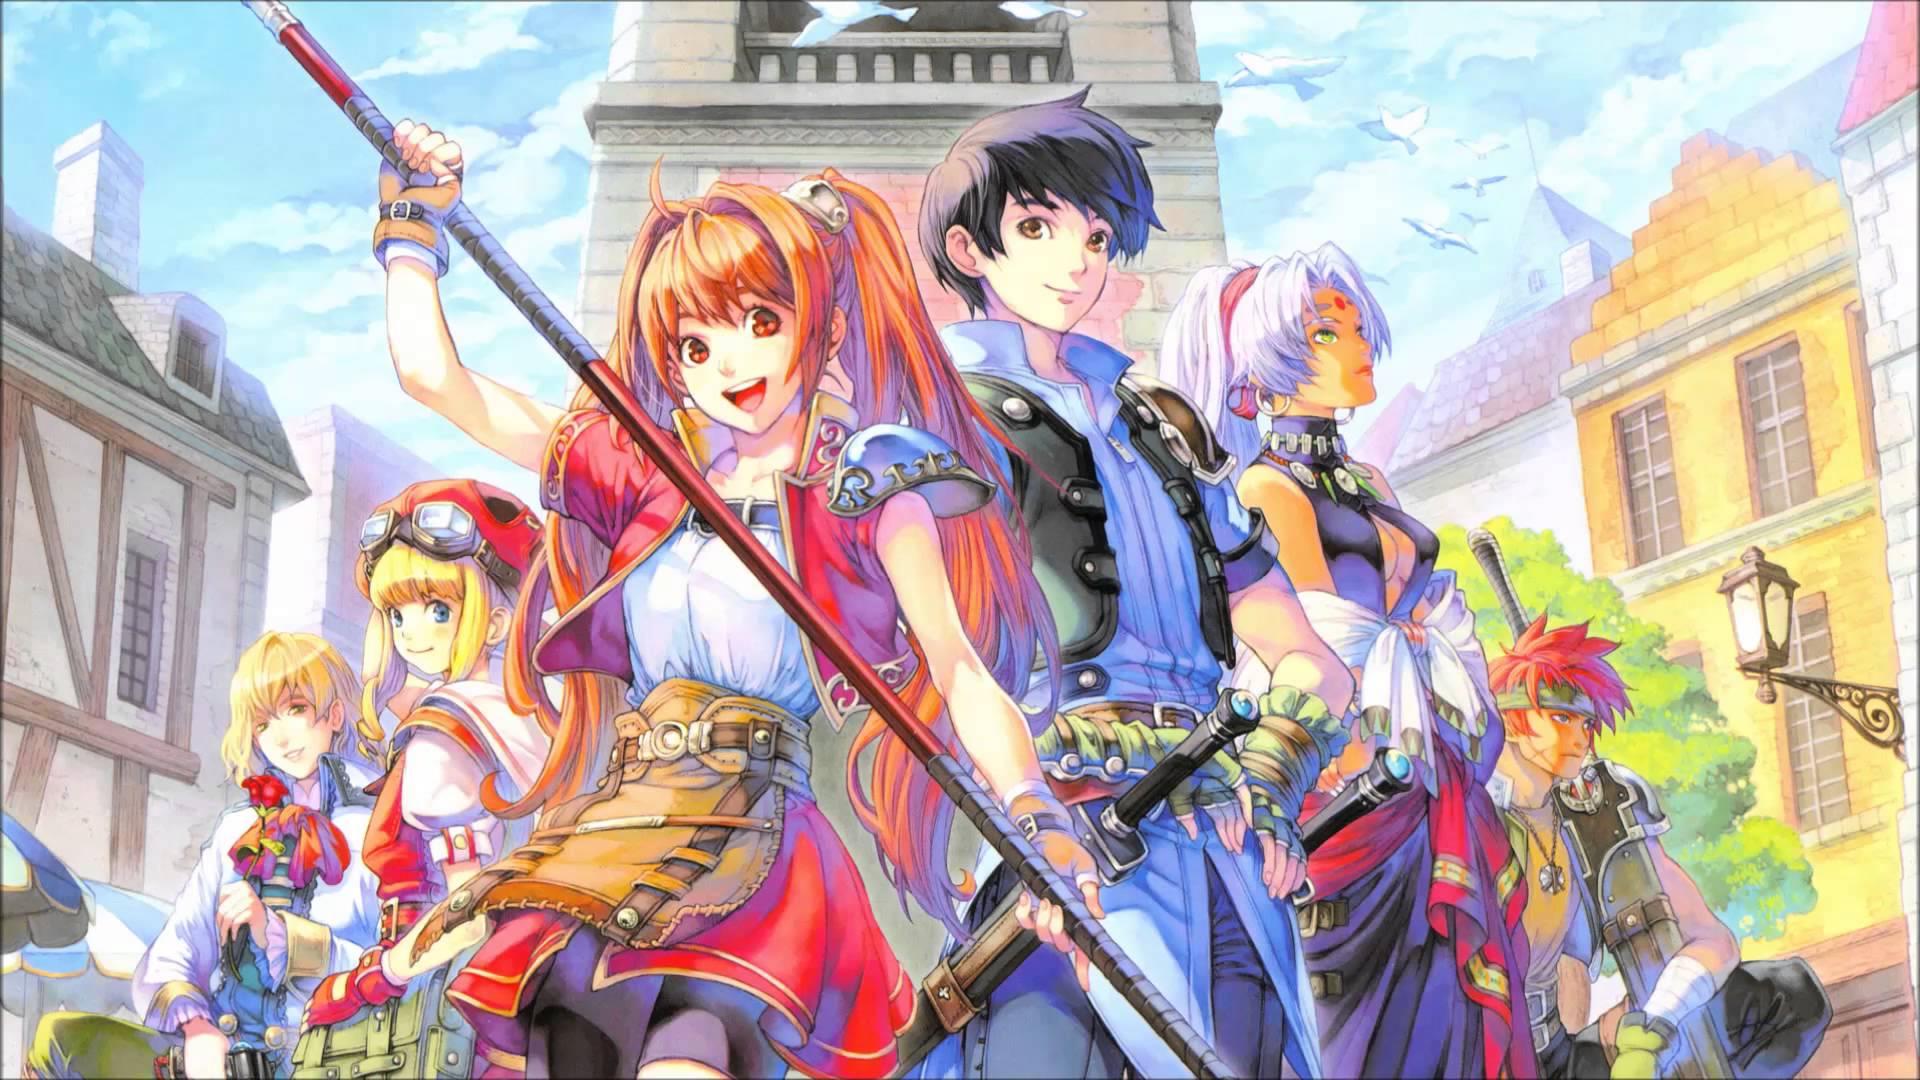 Wallpaper Wallpaper from The Legend of Heroes: Trails